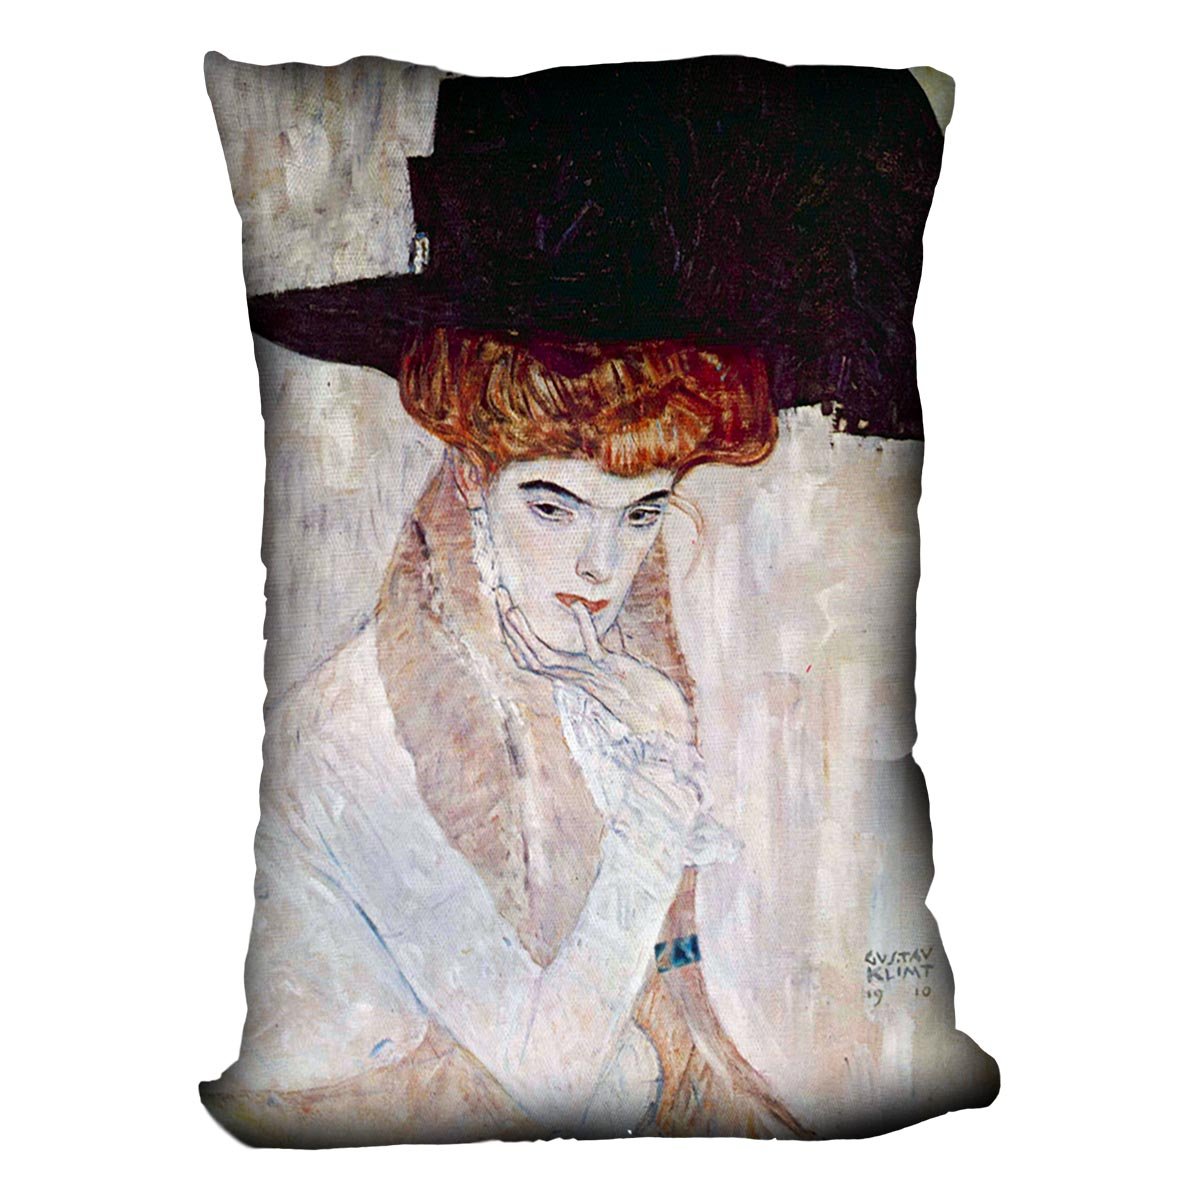 The Black Hat by Klimt Throw Pillow